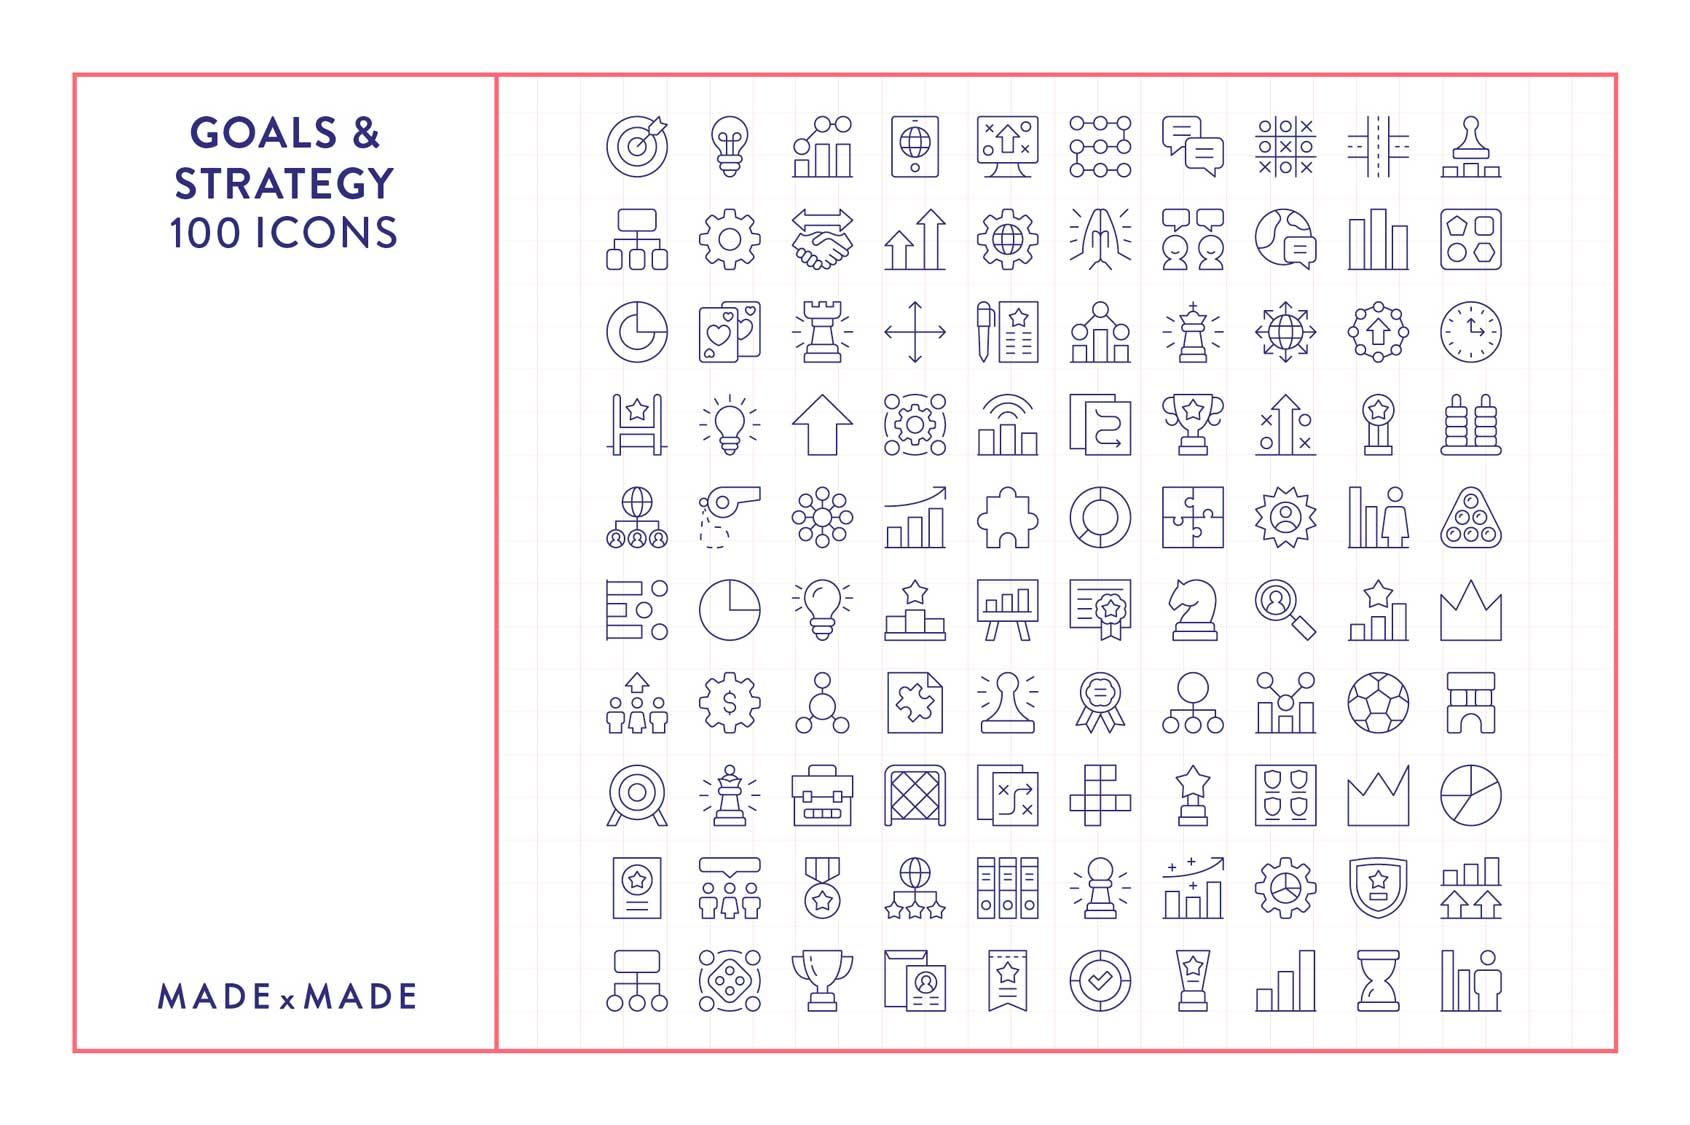 made x made icons goals & strategy cover – consistent icons for success, logic, business, graphs, reports, ideas, innovation, growth, targets, communication - collection sample of 100 icons